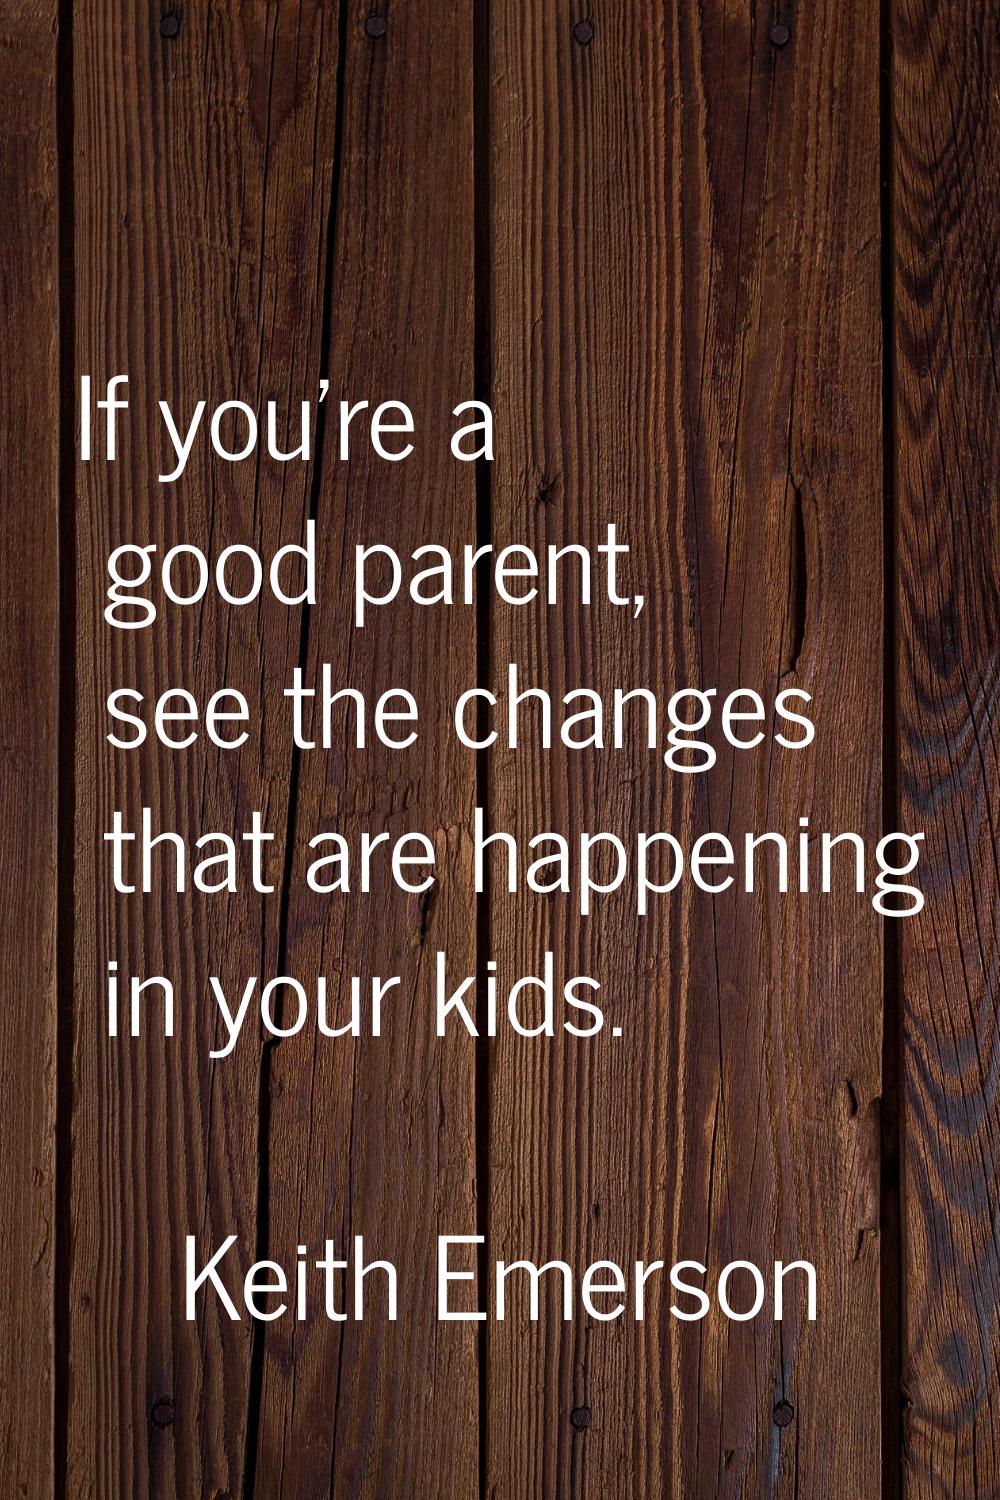 If you're a good parent, see the changes that are happening in your kids.